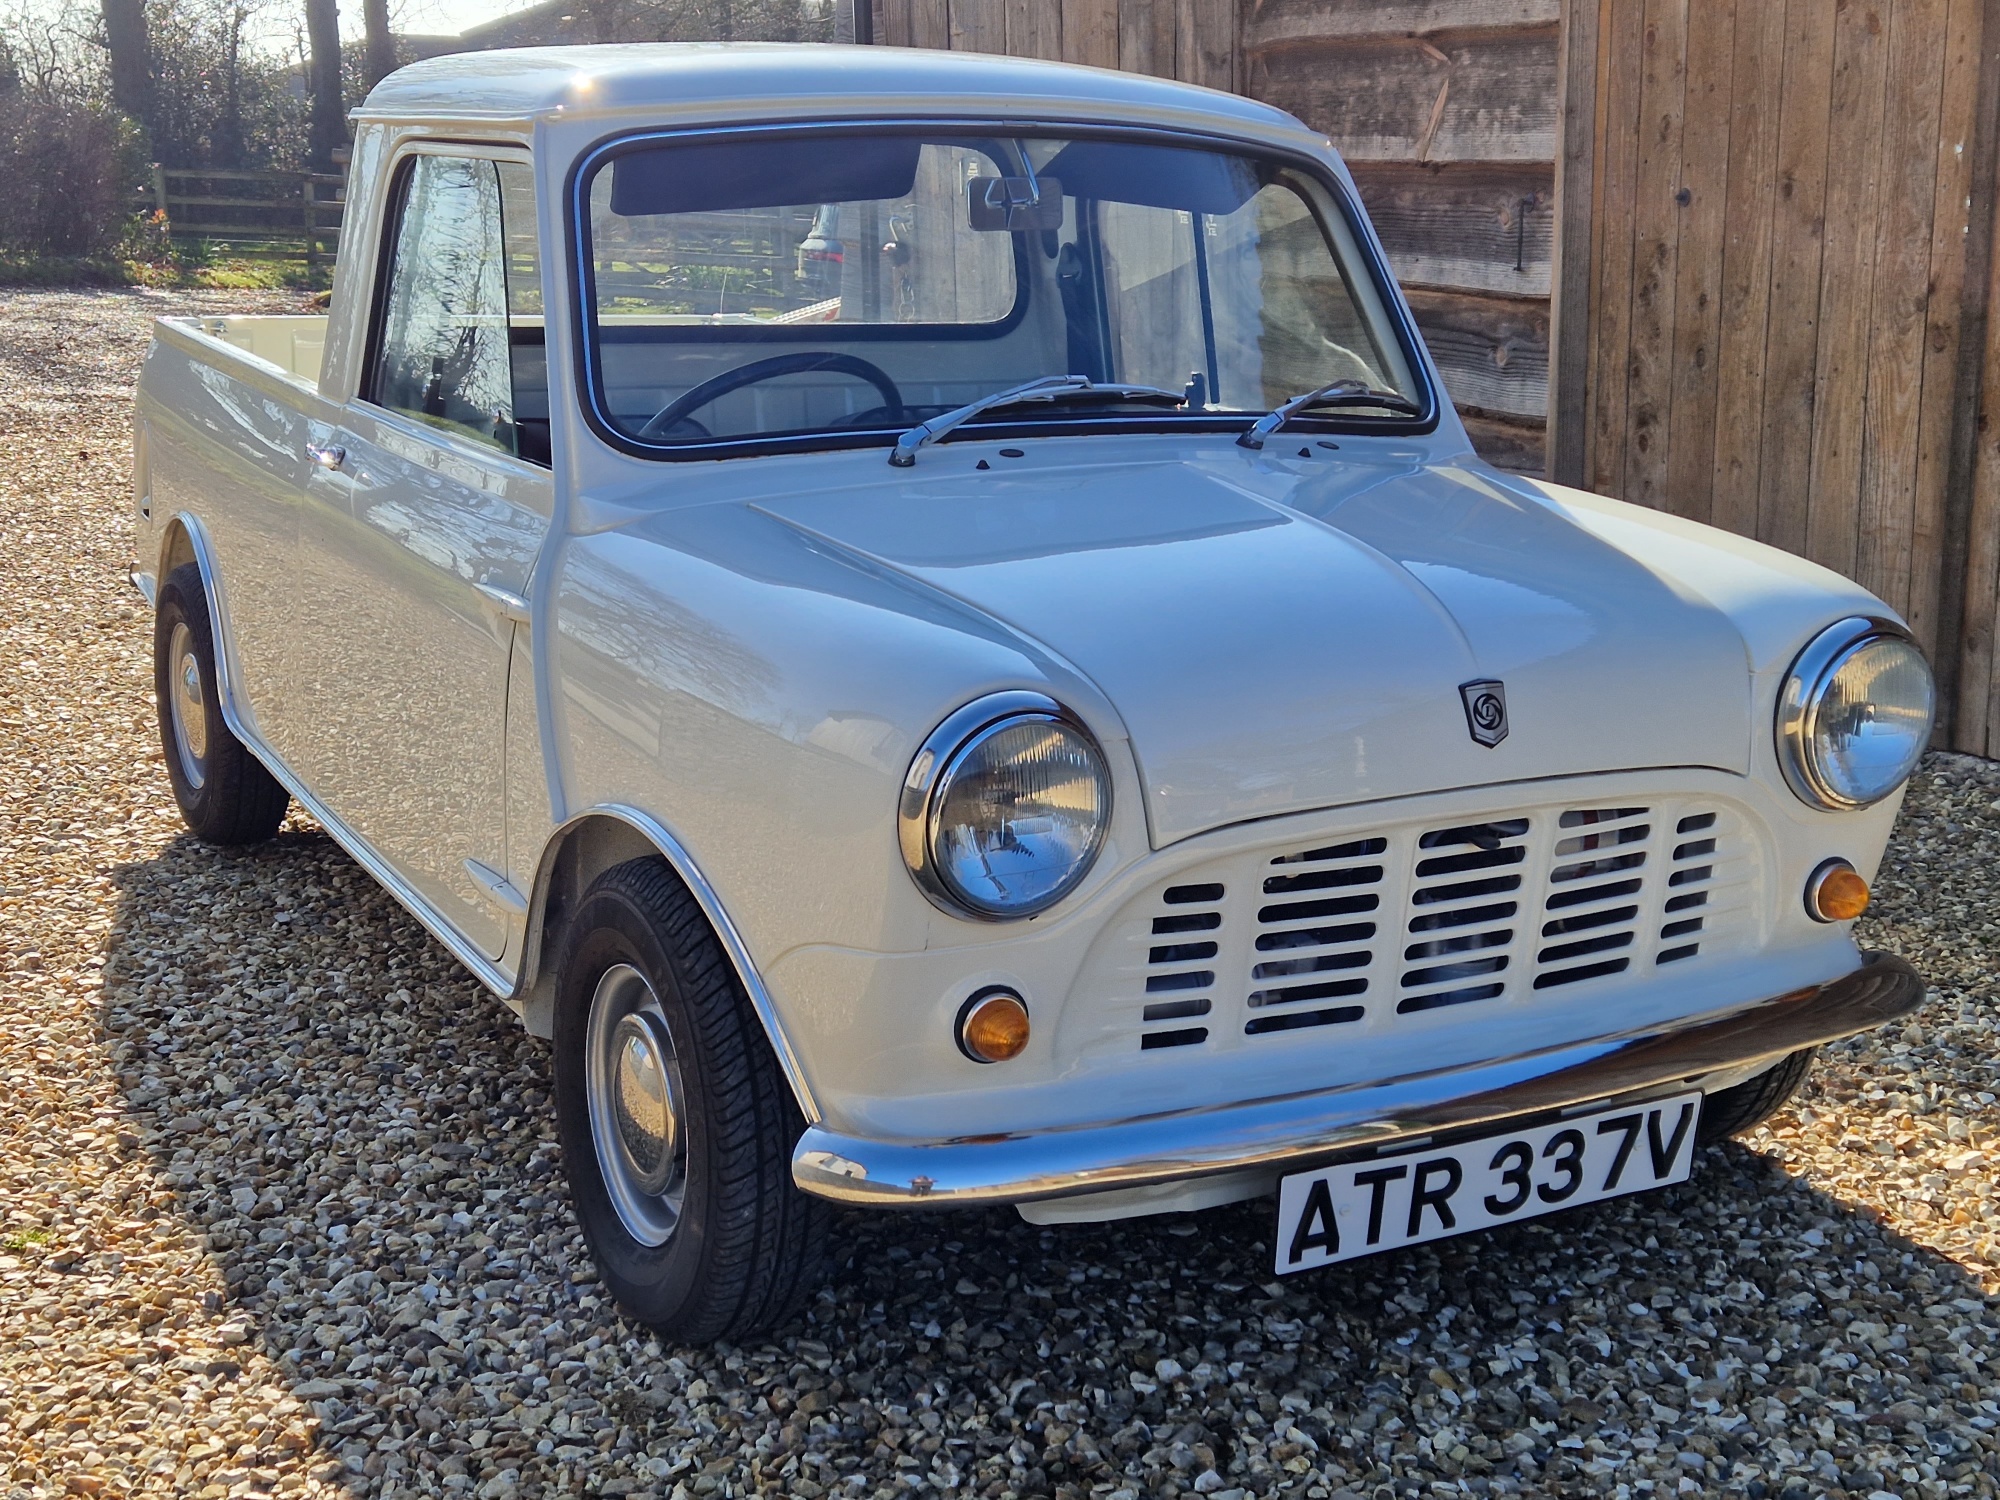 ** NOW SOLD ** 1980 Austin Mini Pick Up In Outstanding Condition.